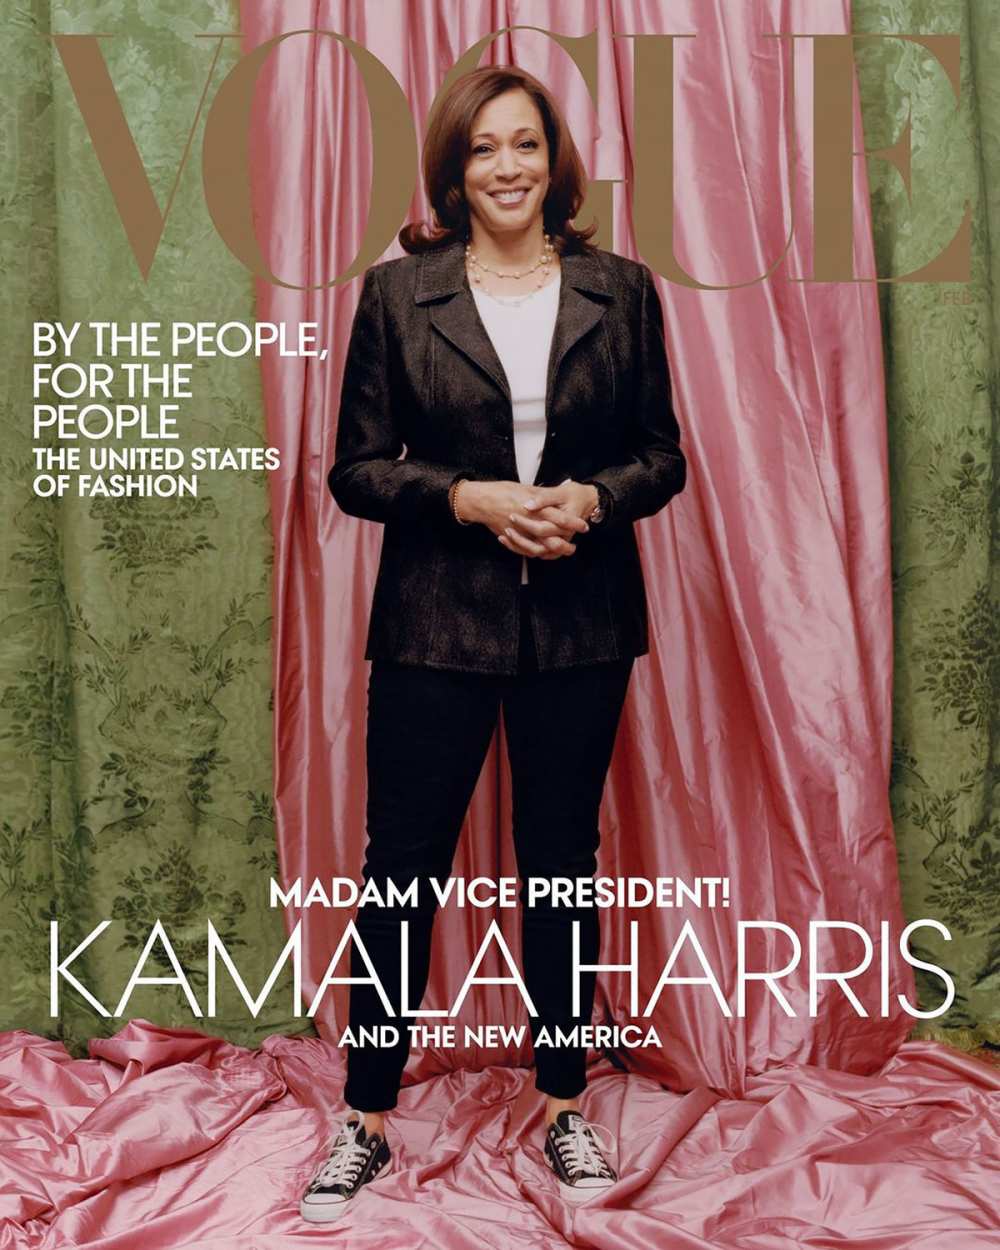 Anna Wintour Responds to the Backlash Over the Kamala Harris 'Vogue' Cover